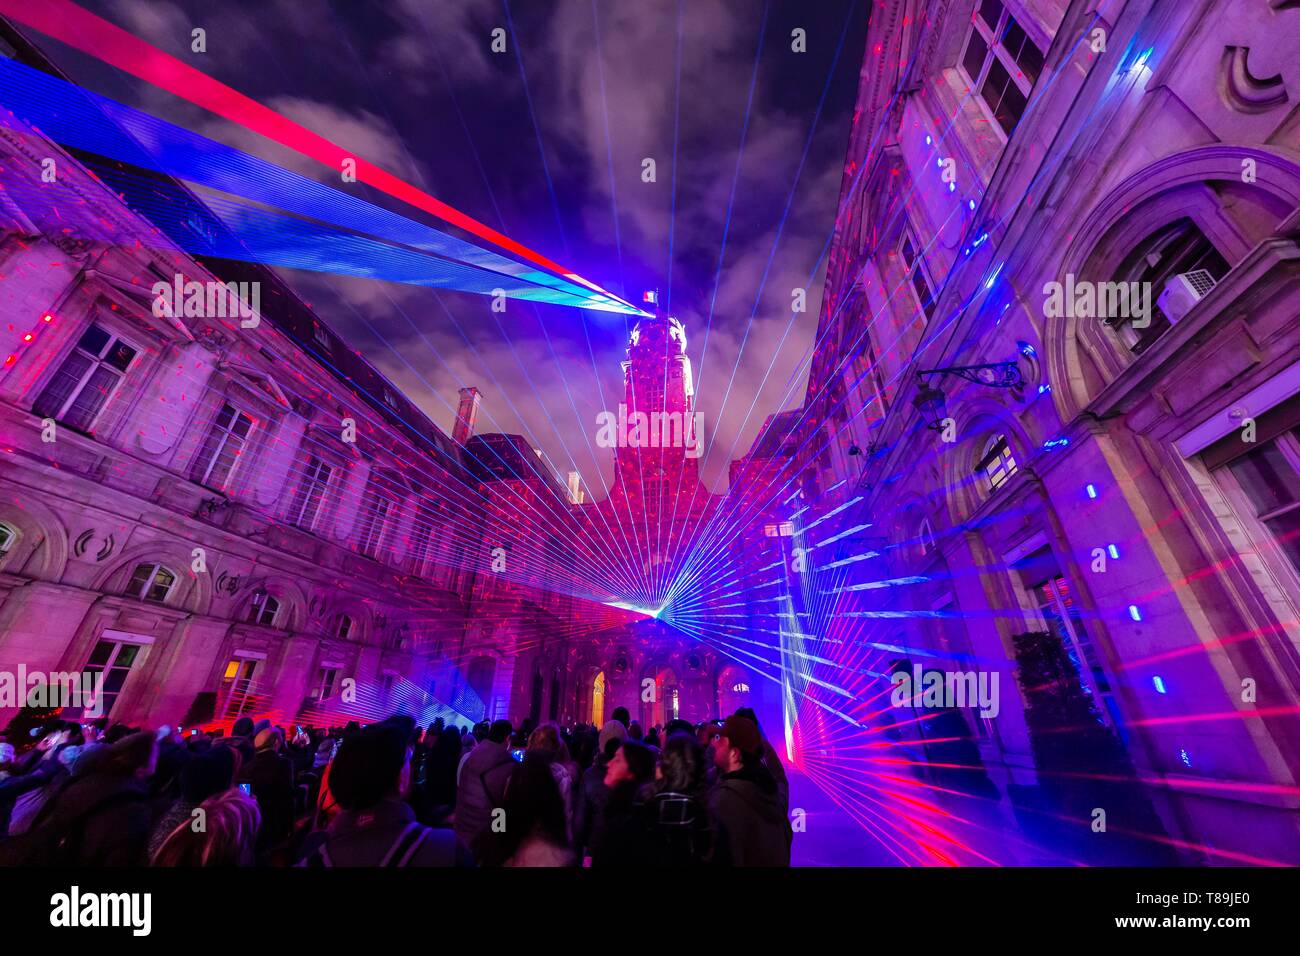 France, Rhone, Lyon, district of Vieux-Lyon, historical site listed as World Heritage by UNESCO, the courtyard of the Town Hall during the Fete des Lumieres (Light Festival), show Tricolor of Ralf Lotting Stock Photo